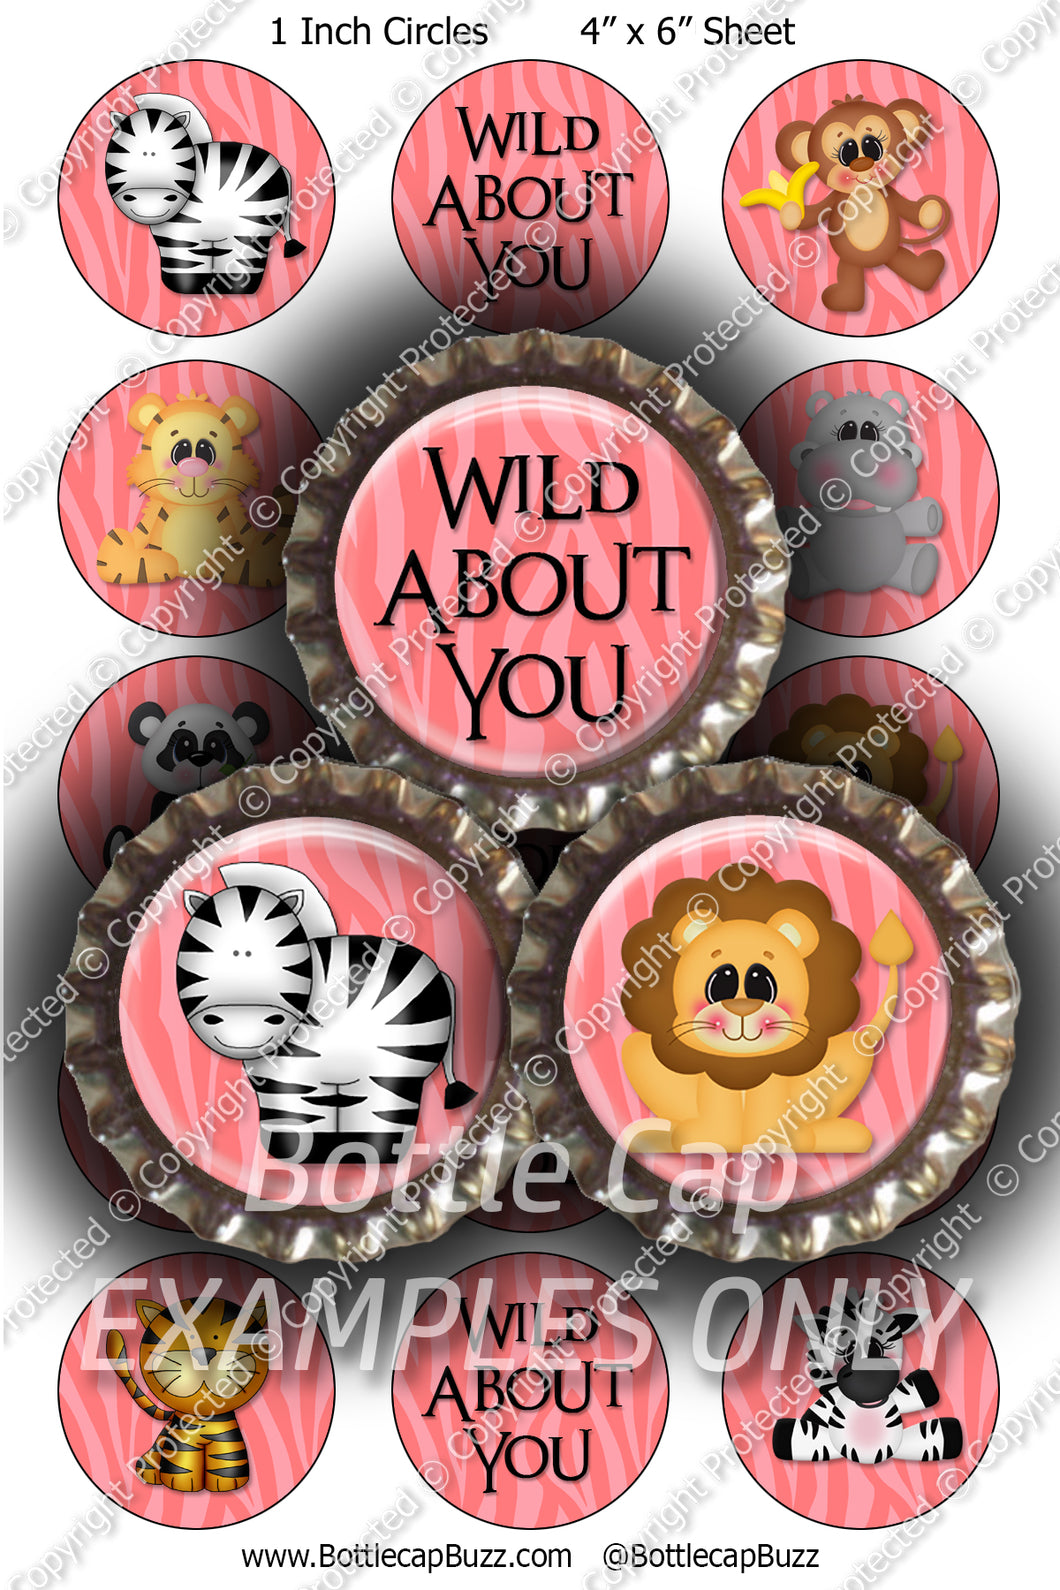 Digital Bottle Cap Images - Wild Animals Collage Sheet (R1113) 1 Inch Circles for Bottlecaps, Magnets, Jewelry, Hairbows, Buttons15